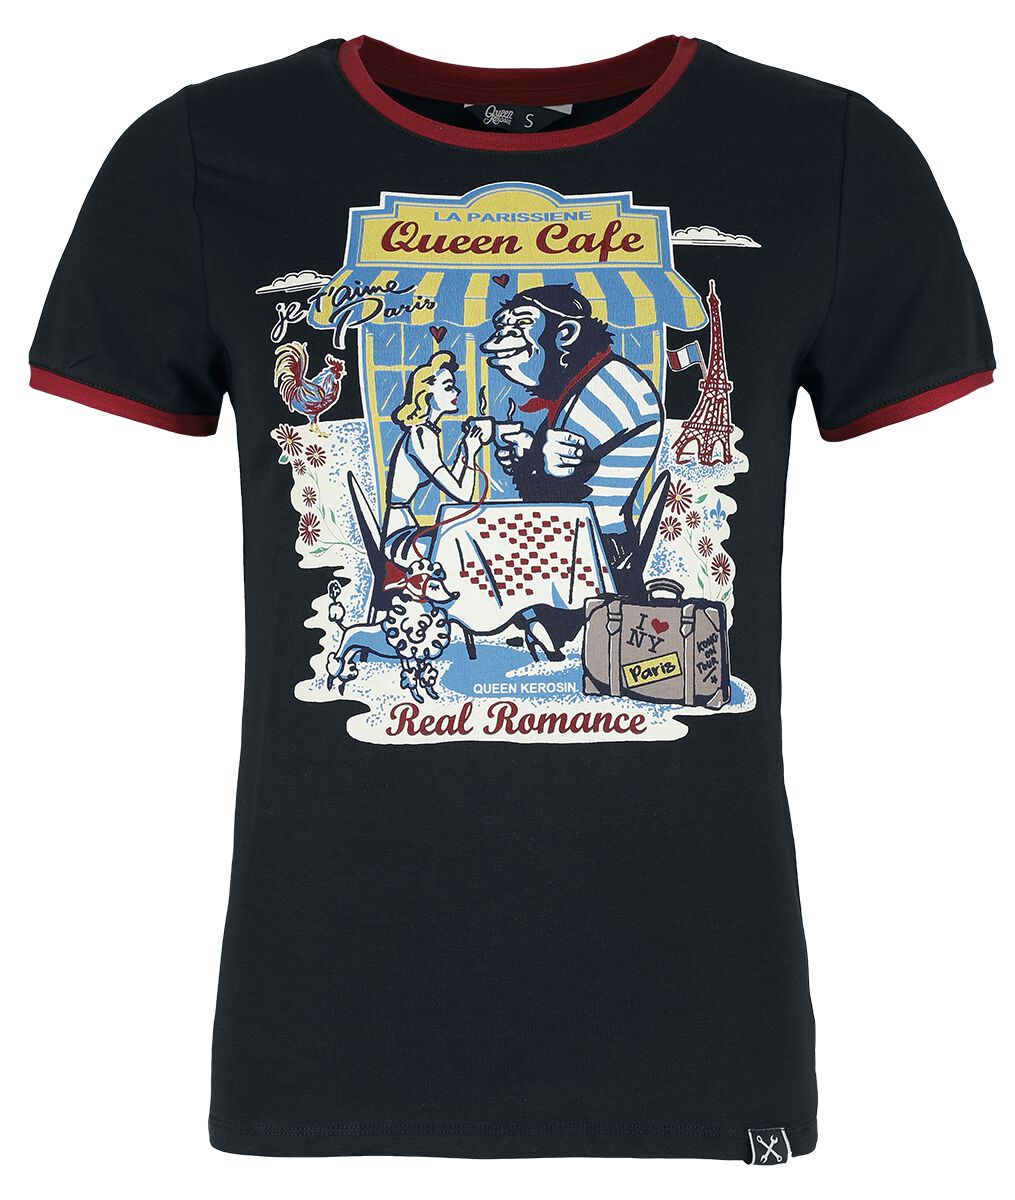 Image of T-Shirt Rockabilly di Queen Kerosin - Queen Cafe - XS a 4XL - Donna - nero/rosso